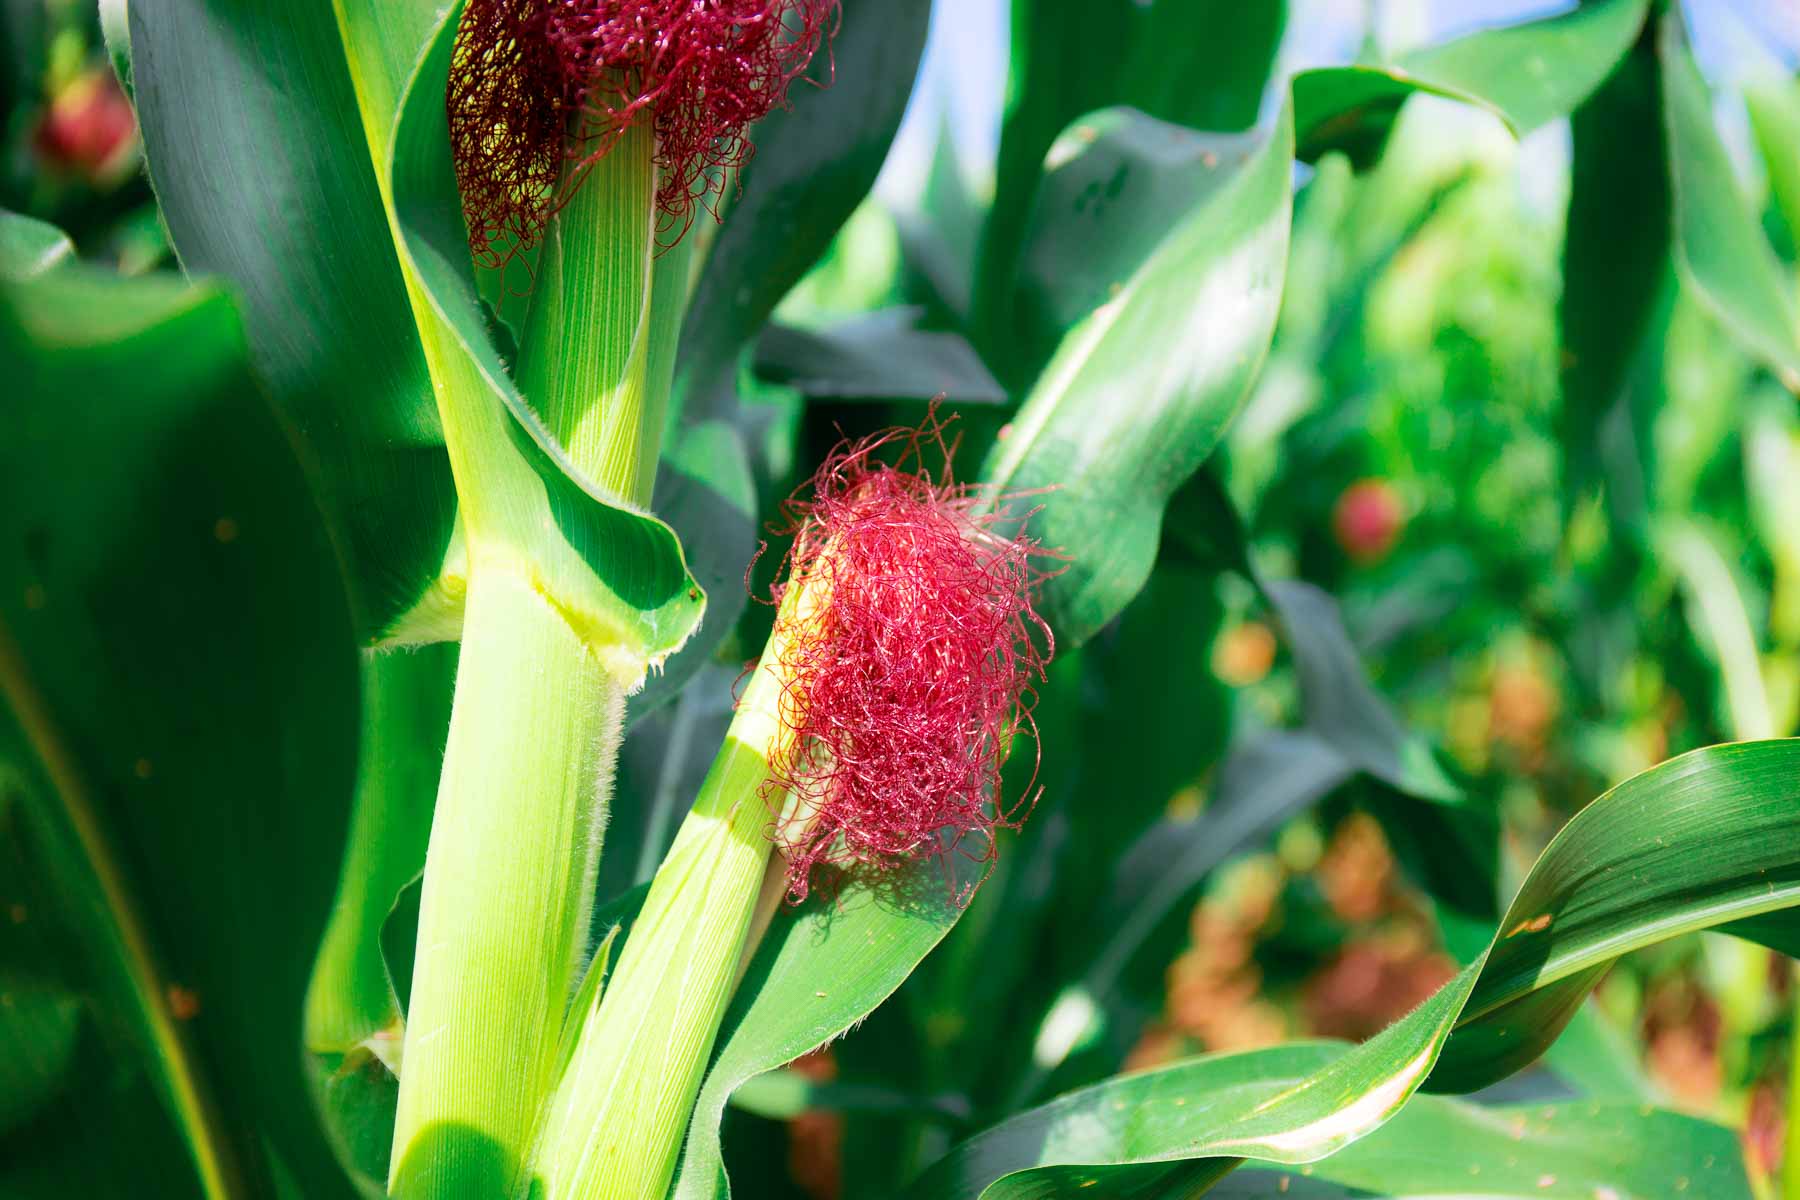 An ear of corn growing in a raised bed with its emerging silks and tassels on full display.